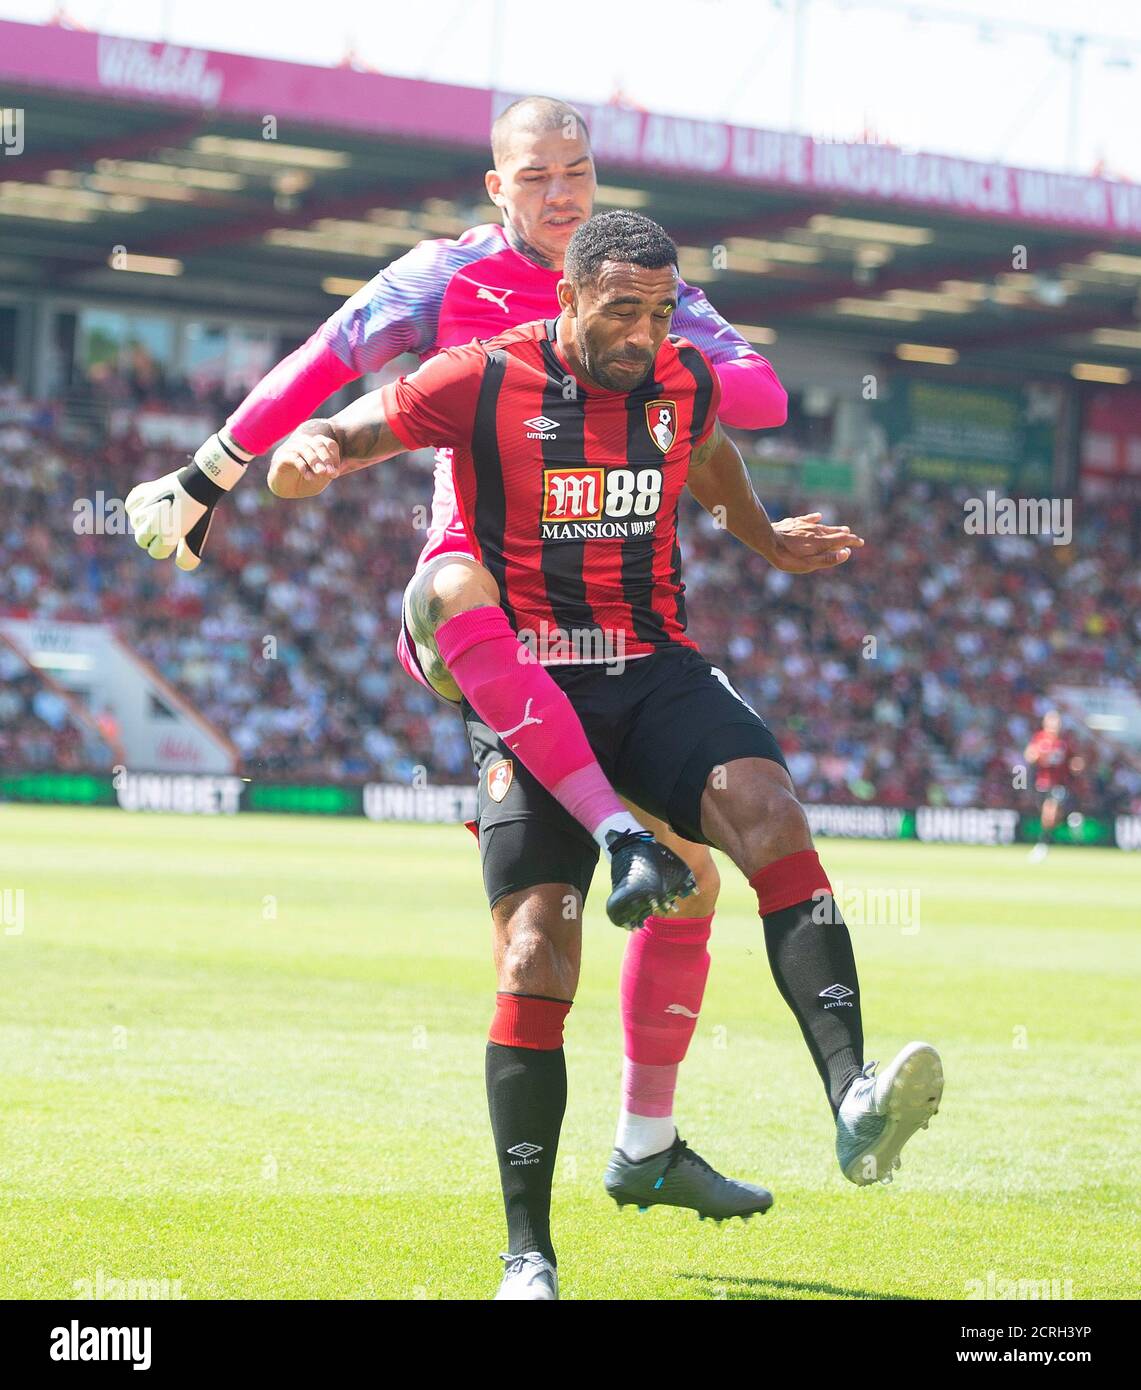 Manchester City's Goalkeeper Ederson challenges Bournemouth's Callum Wilson. PICTURE CREDIT : © MARK PAIN / ALAMY STOCK PHOTO Stock Photo